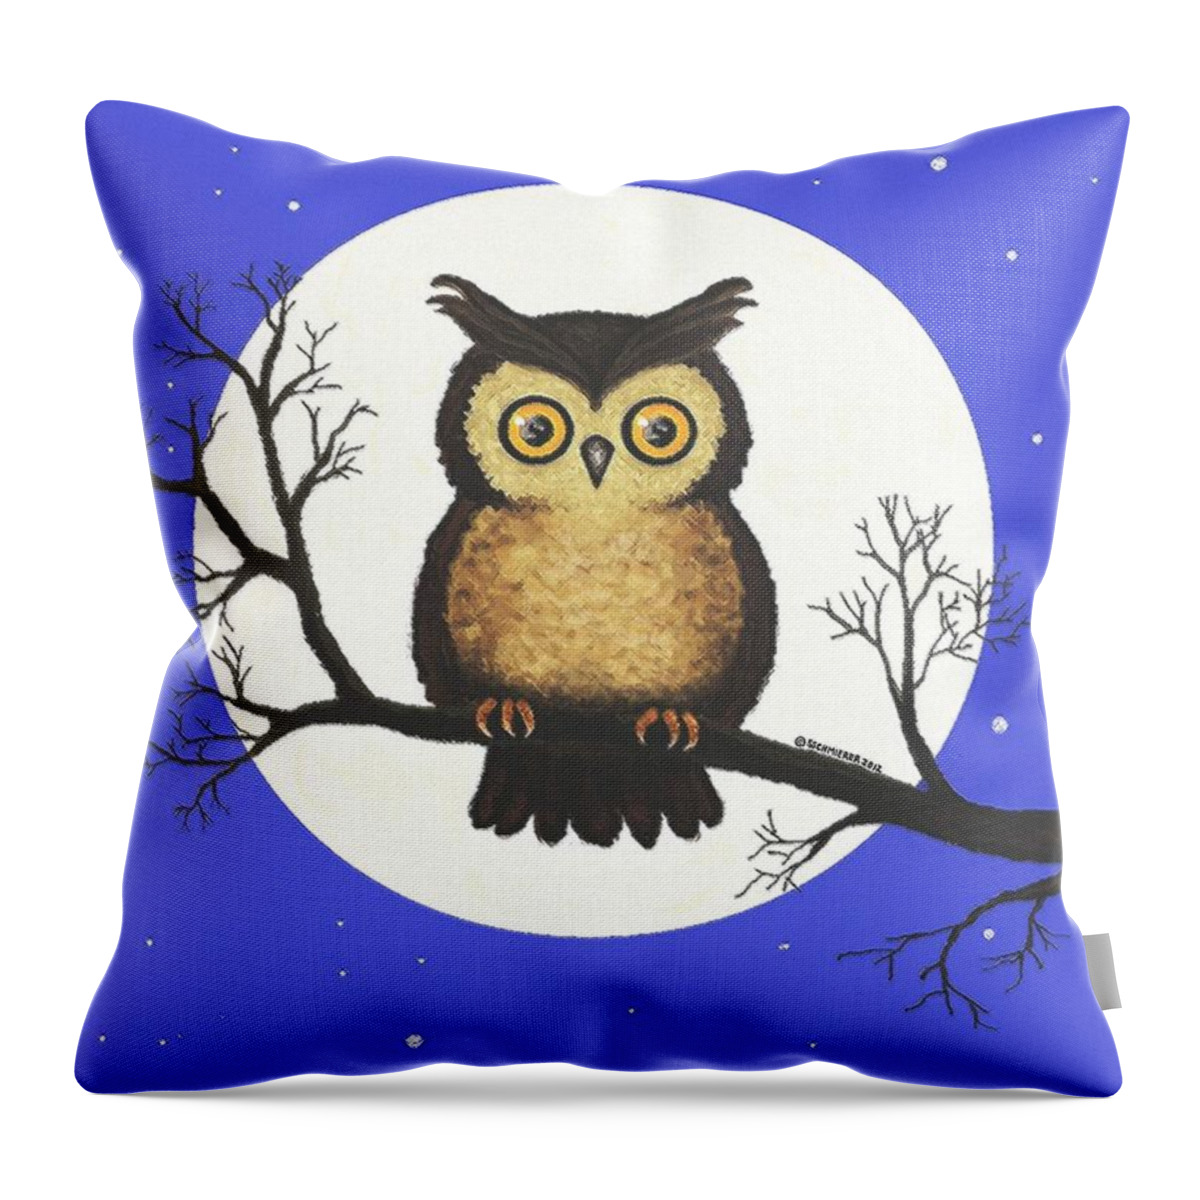 Owl Throw Pillow featuring the painting Whooo You Lookin' At #1 by SophiaArt Gallery